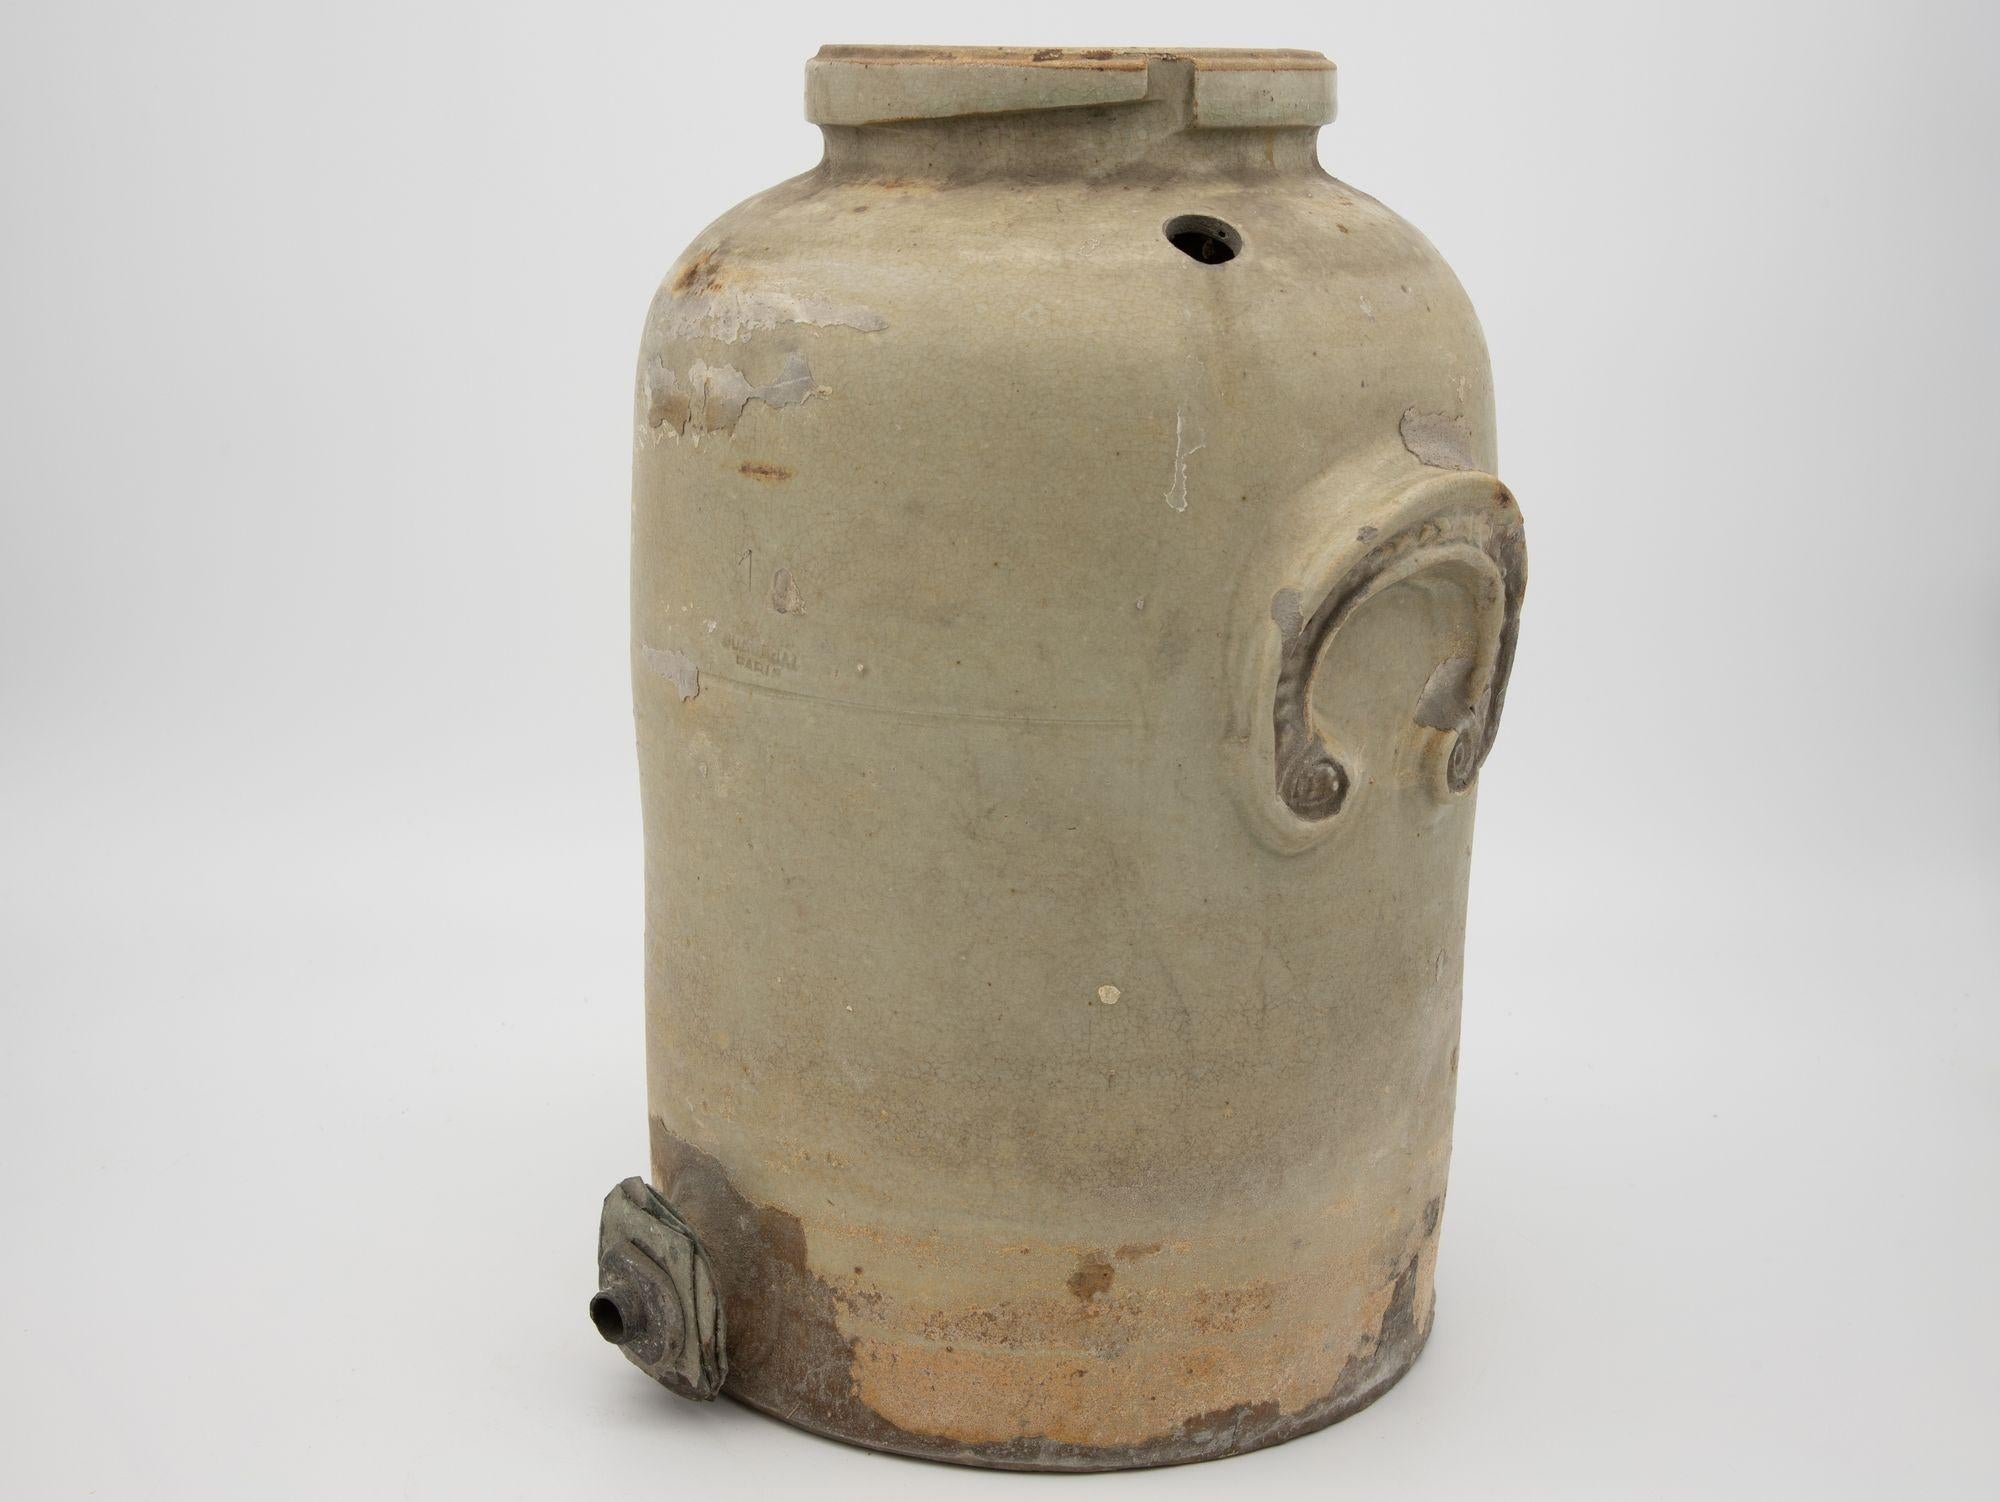 Late 19th Century French earthenware pottery bottle or jug from Normandy. Spout in tact. Originally used for water or cider.